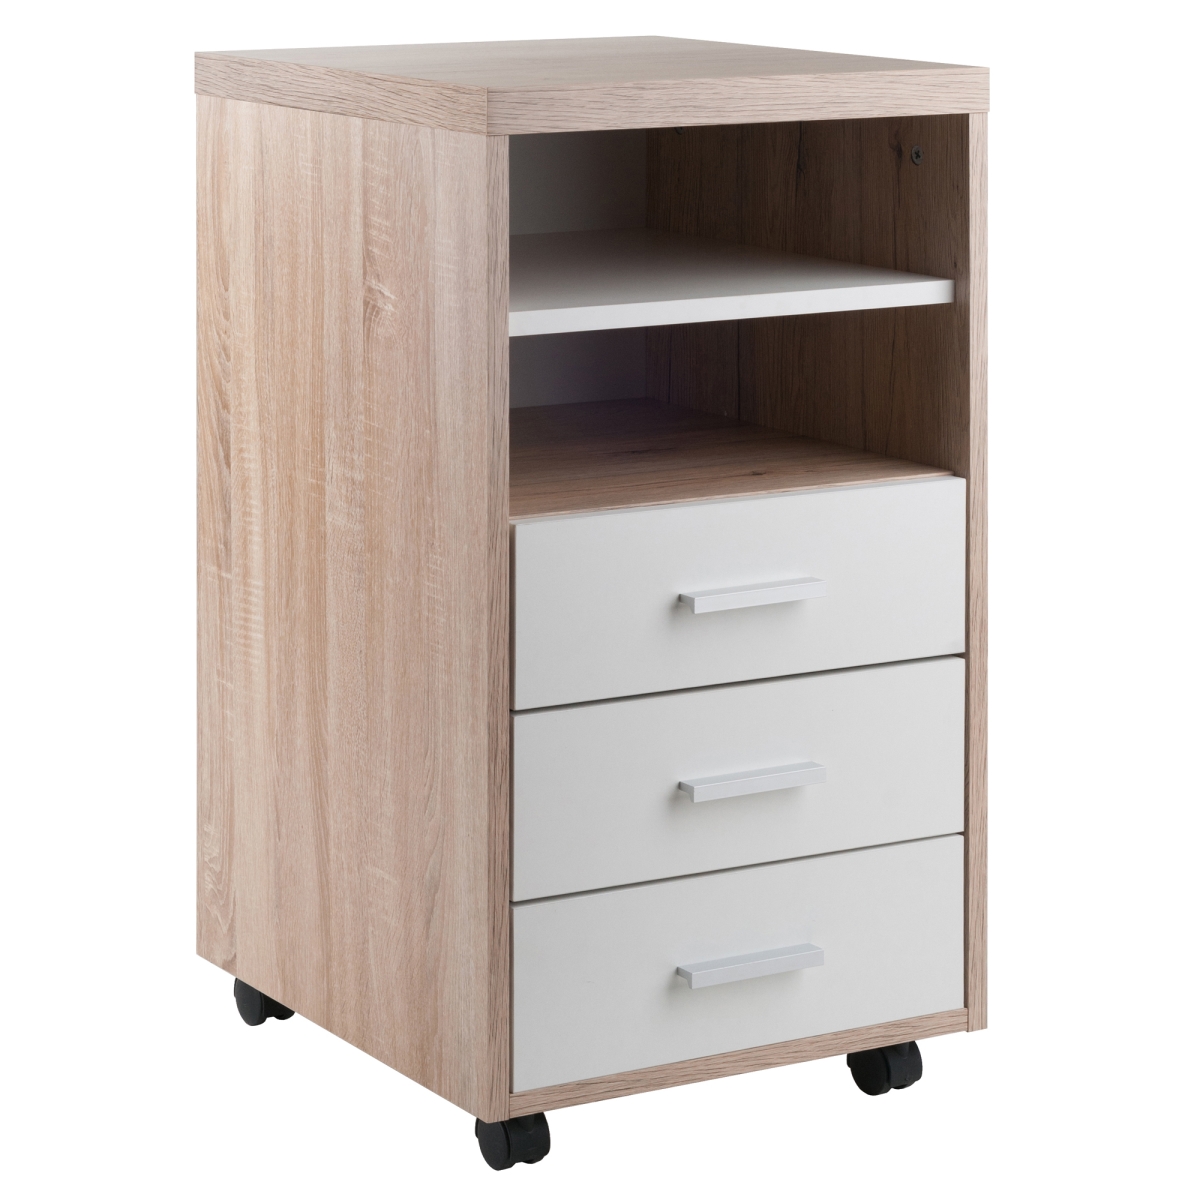 18532 Kenner Mobile Storage Cabinet With 3 Drawers & 2 Shelves - Reclaimed Wood, White - 15.75 X 18.3 X 29.25 In.